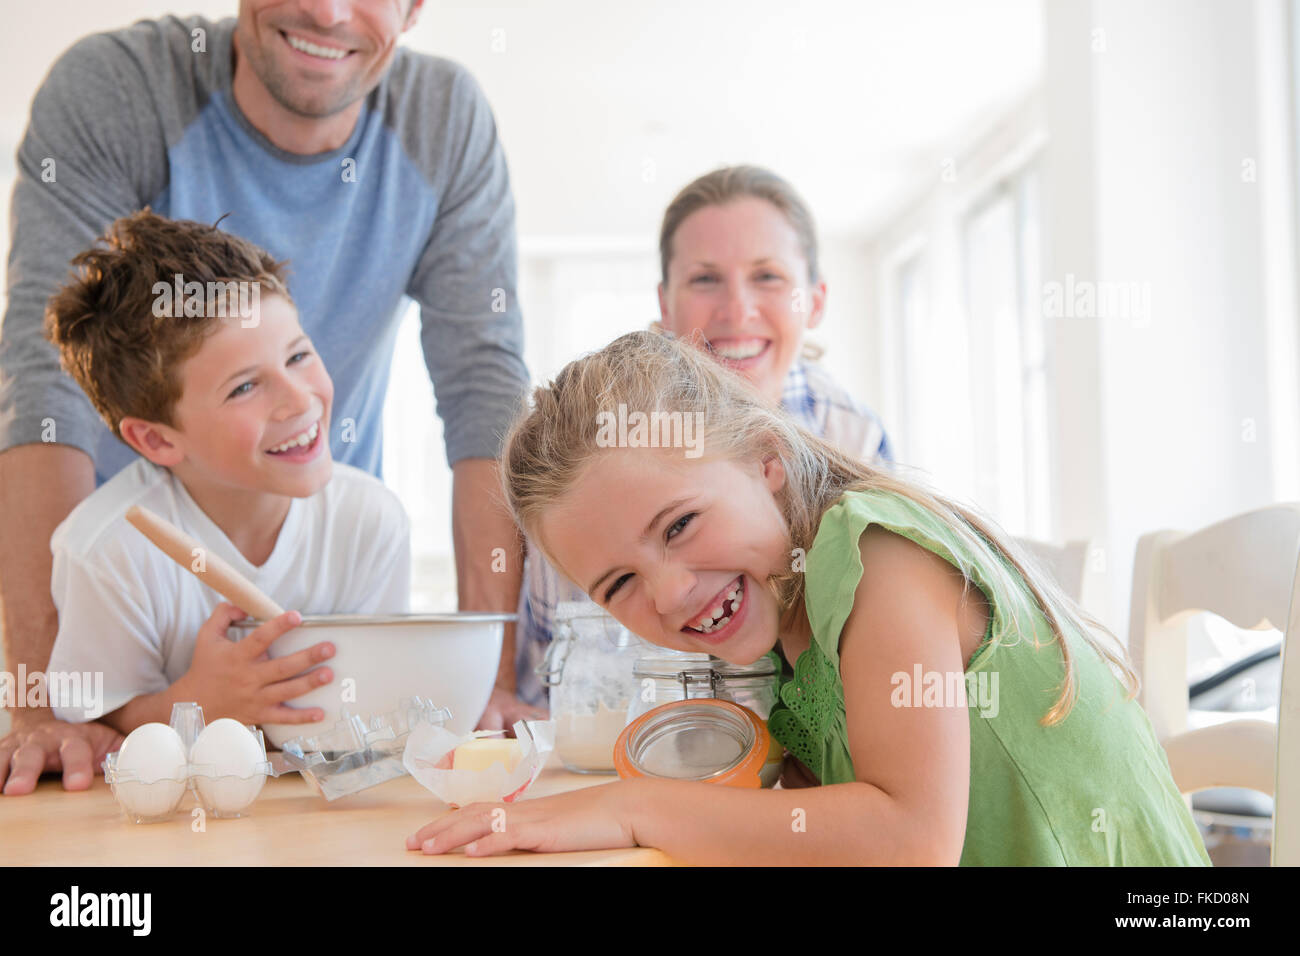 Family with two children (6-7, 8-9) preparing food, laughing Stock Photo